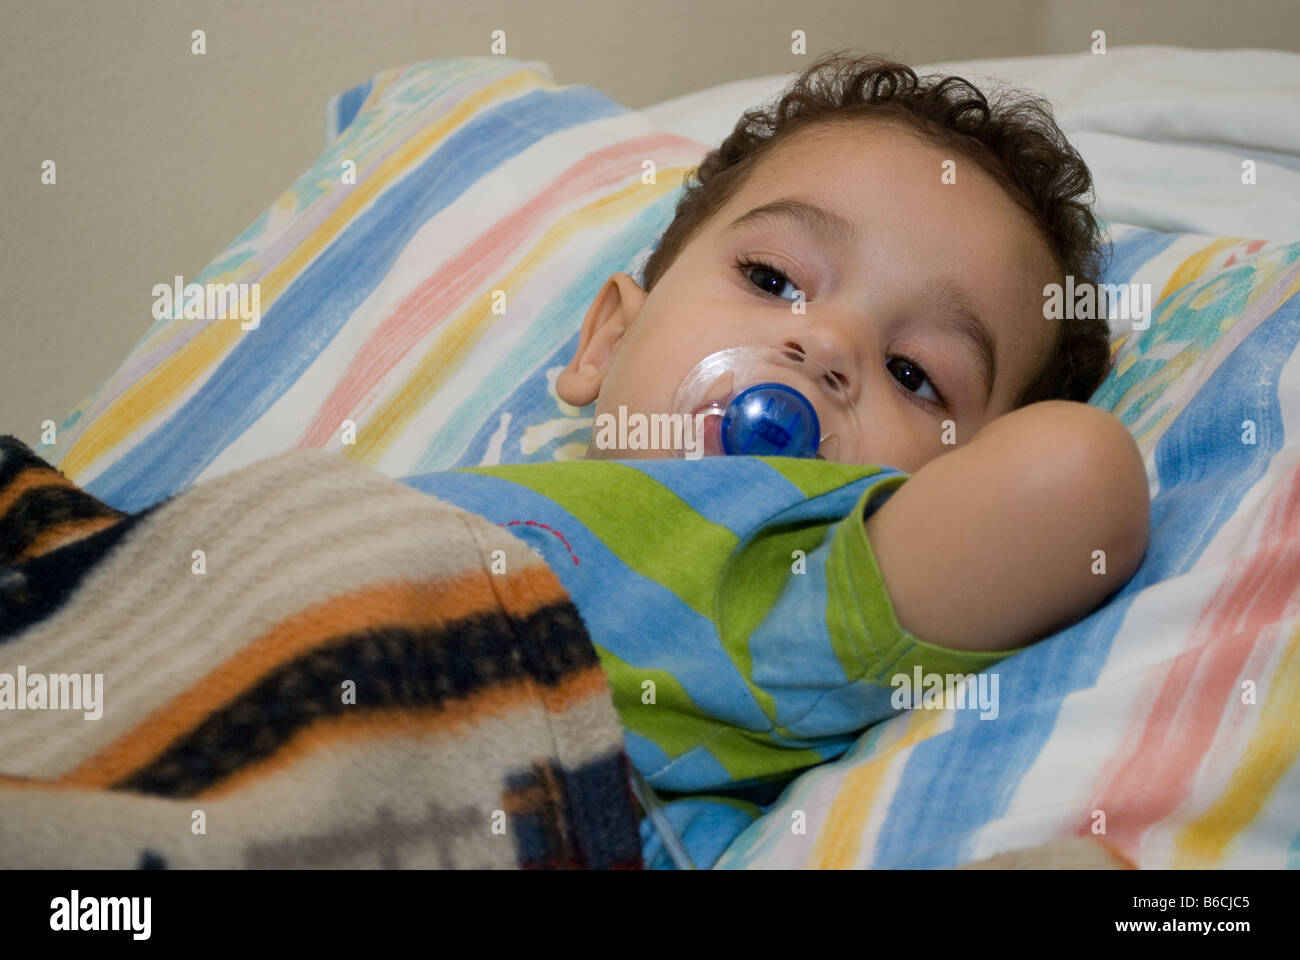 A toddler in bed Stock Photo